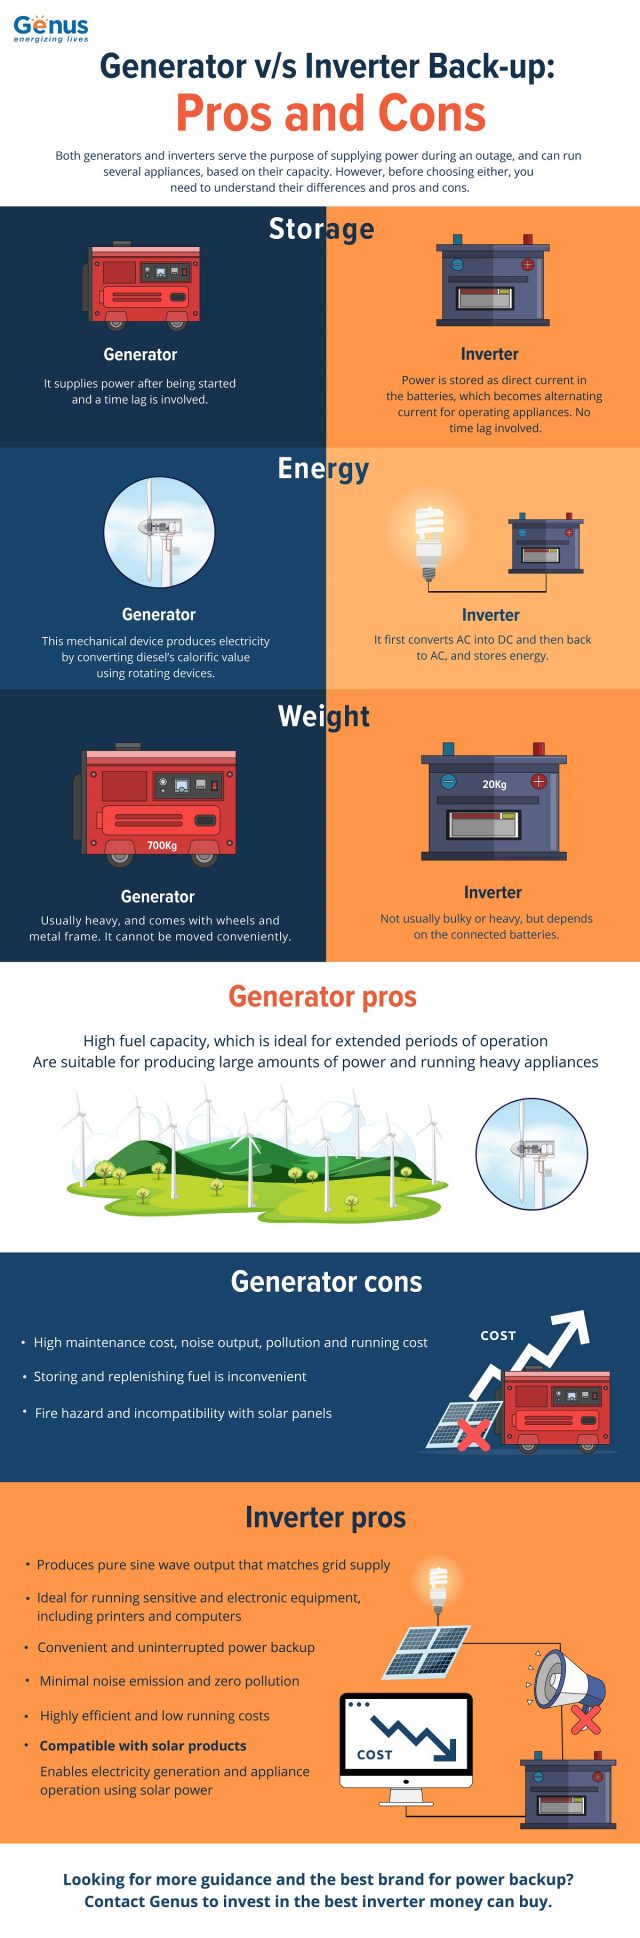 Generator vs Inverter Back-up Pros and Cons Infographic